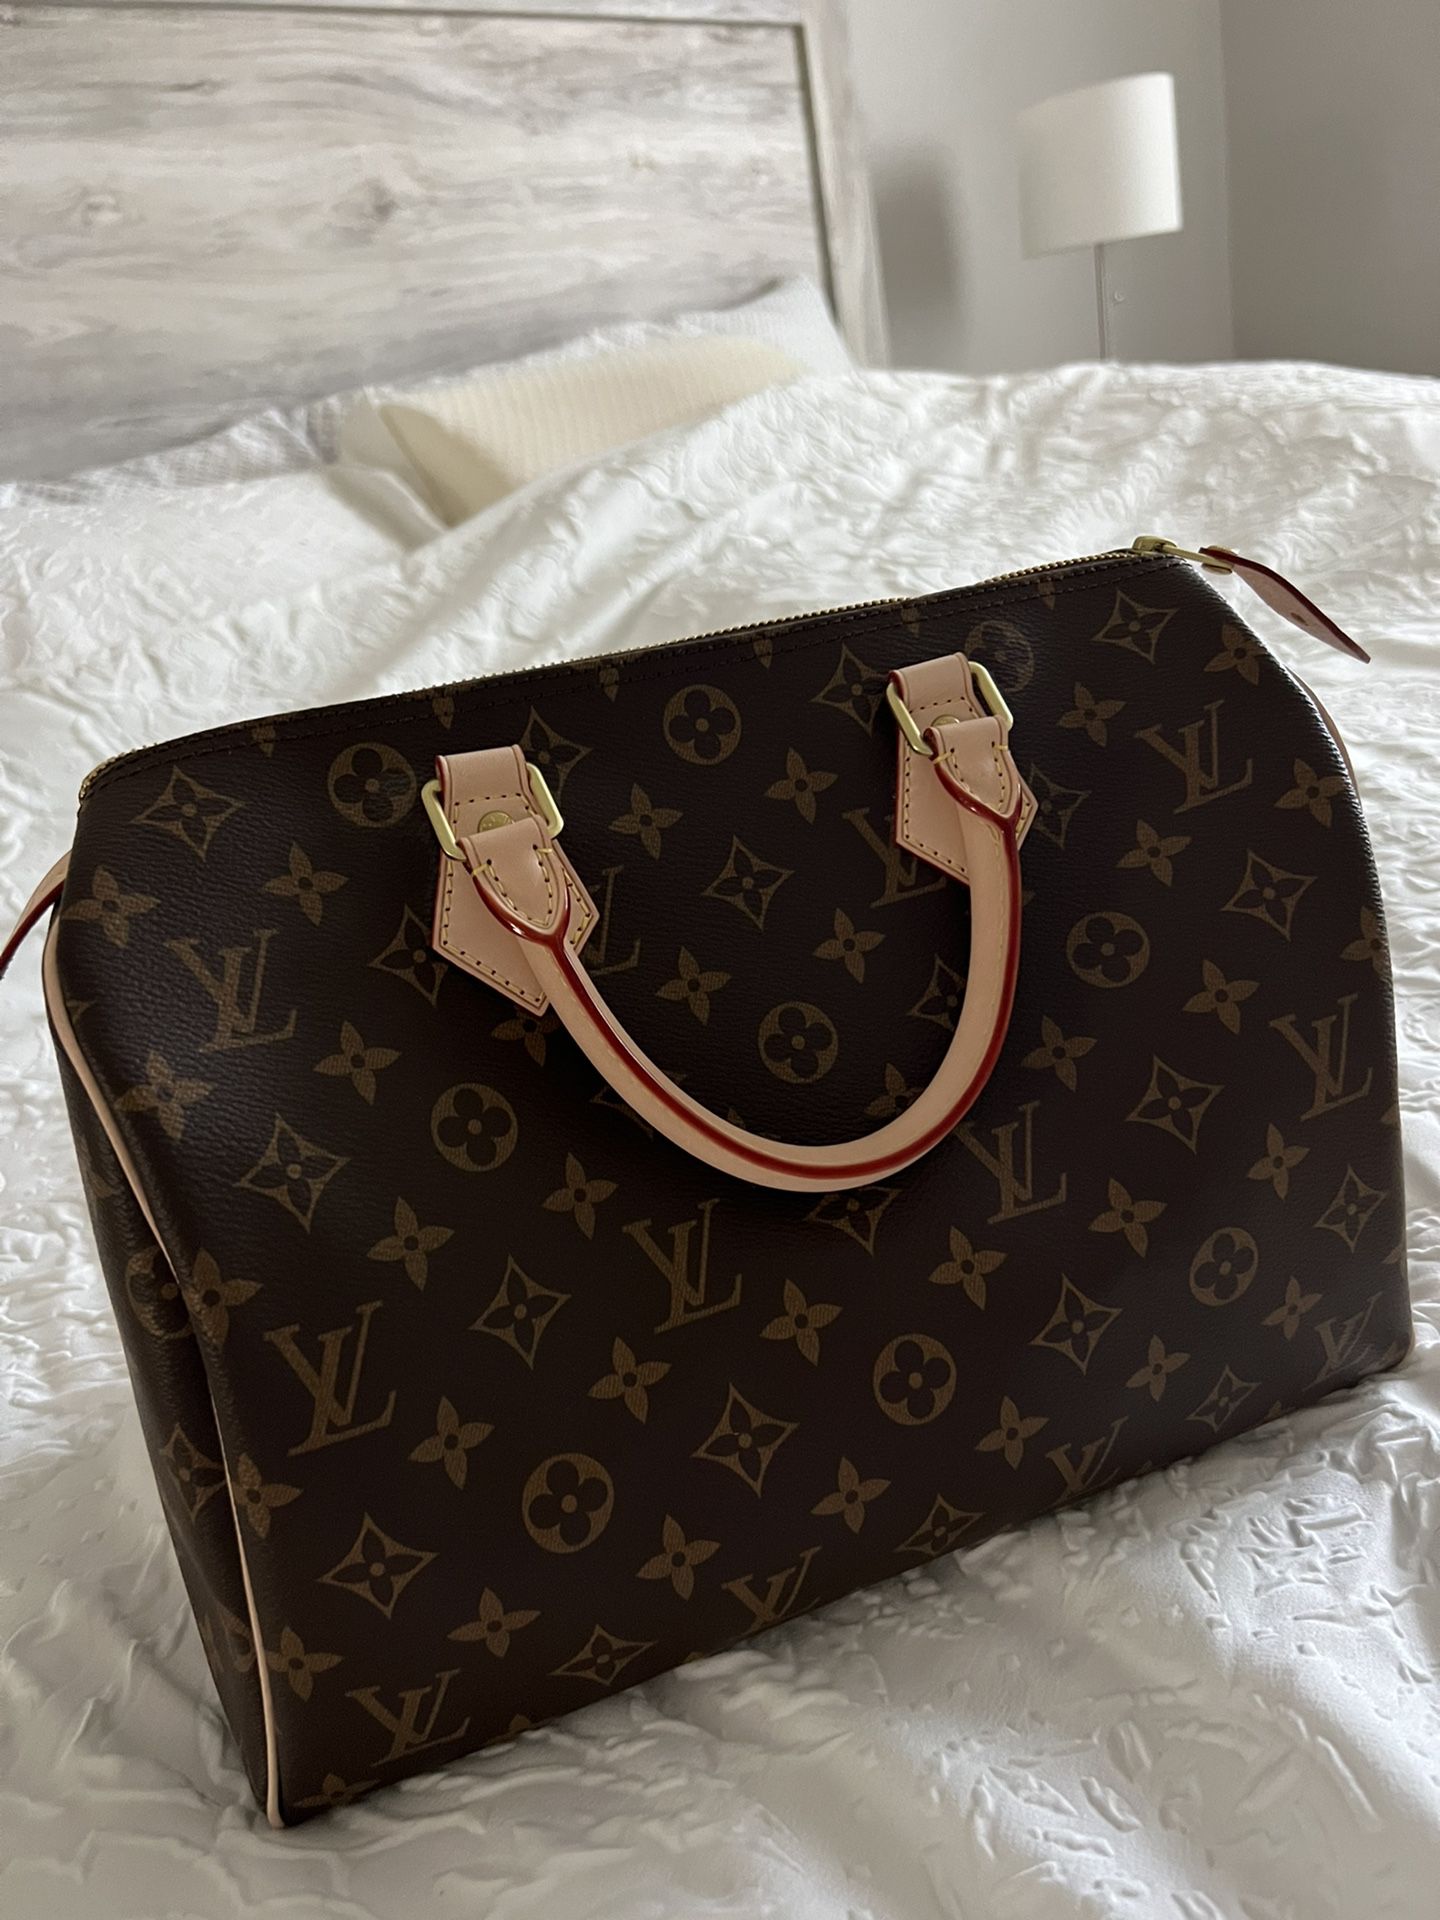 Authenthic Louis Vuitton Wave Camera Bag for Sale in Las Vegas, NV - OfferUp